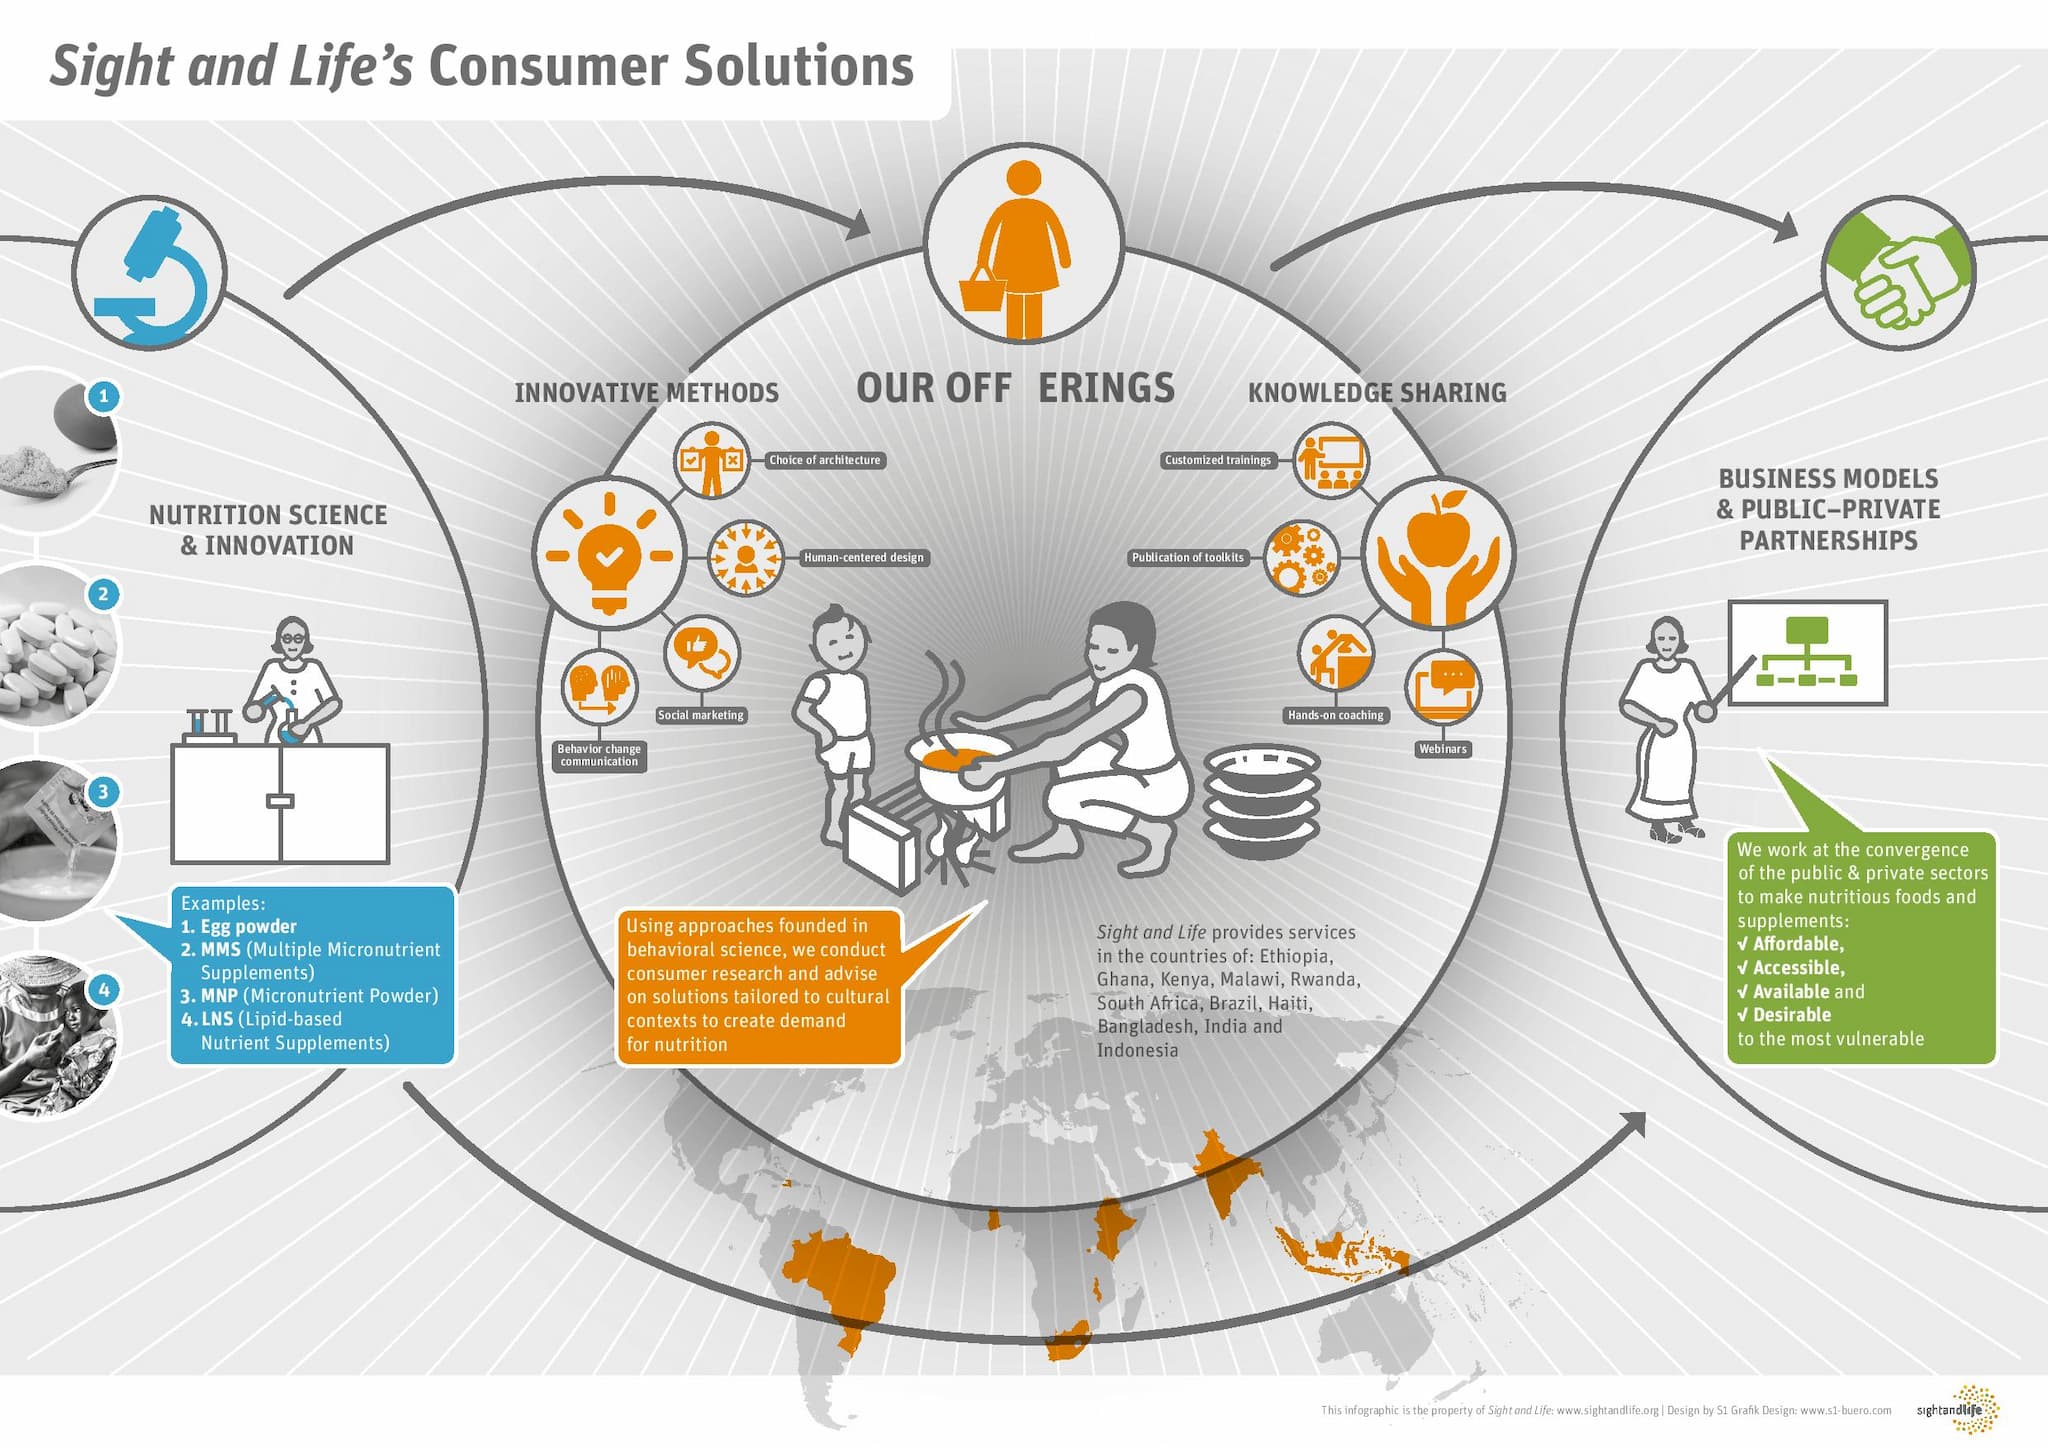 Sight and Life's Consumer Solutions